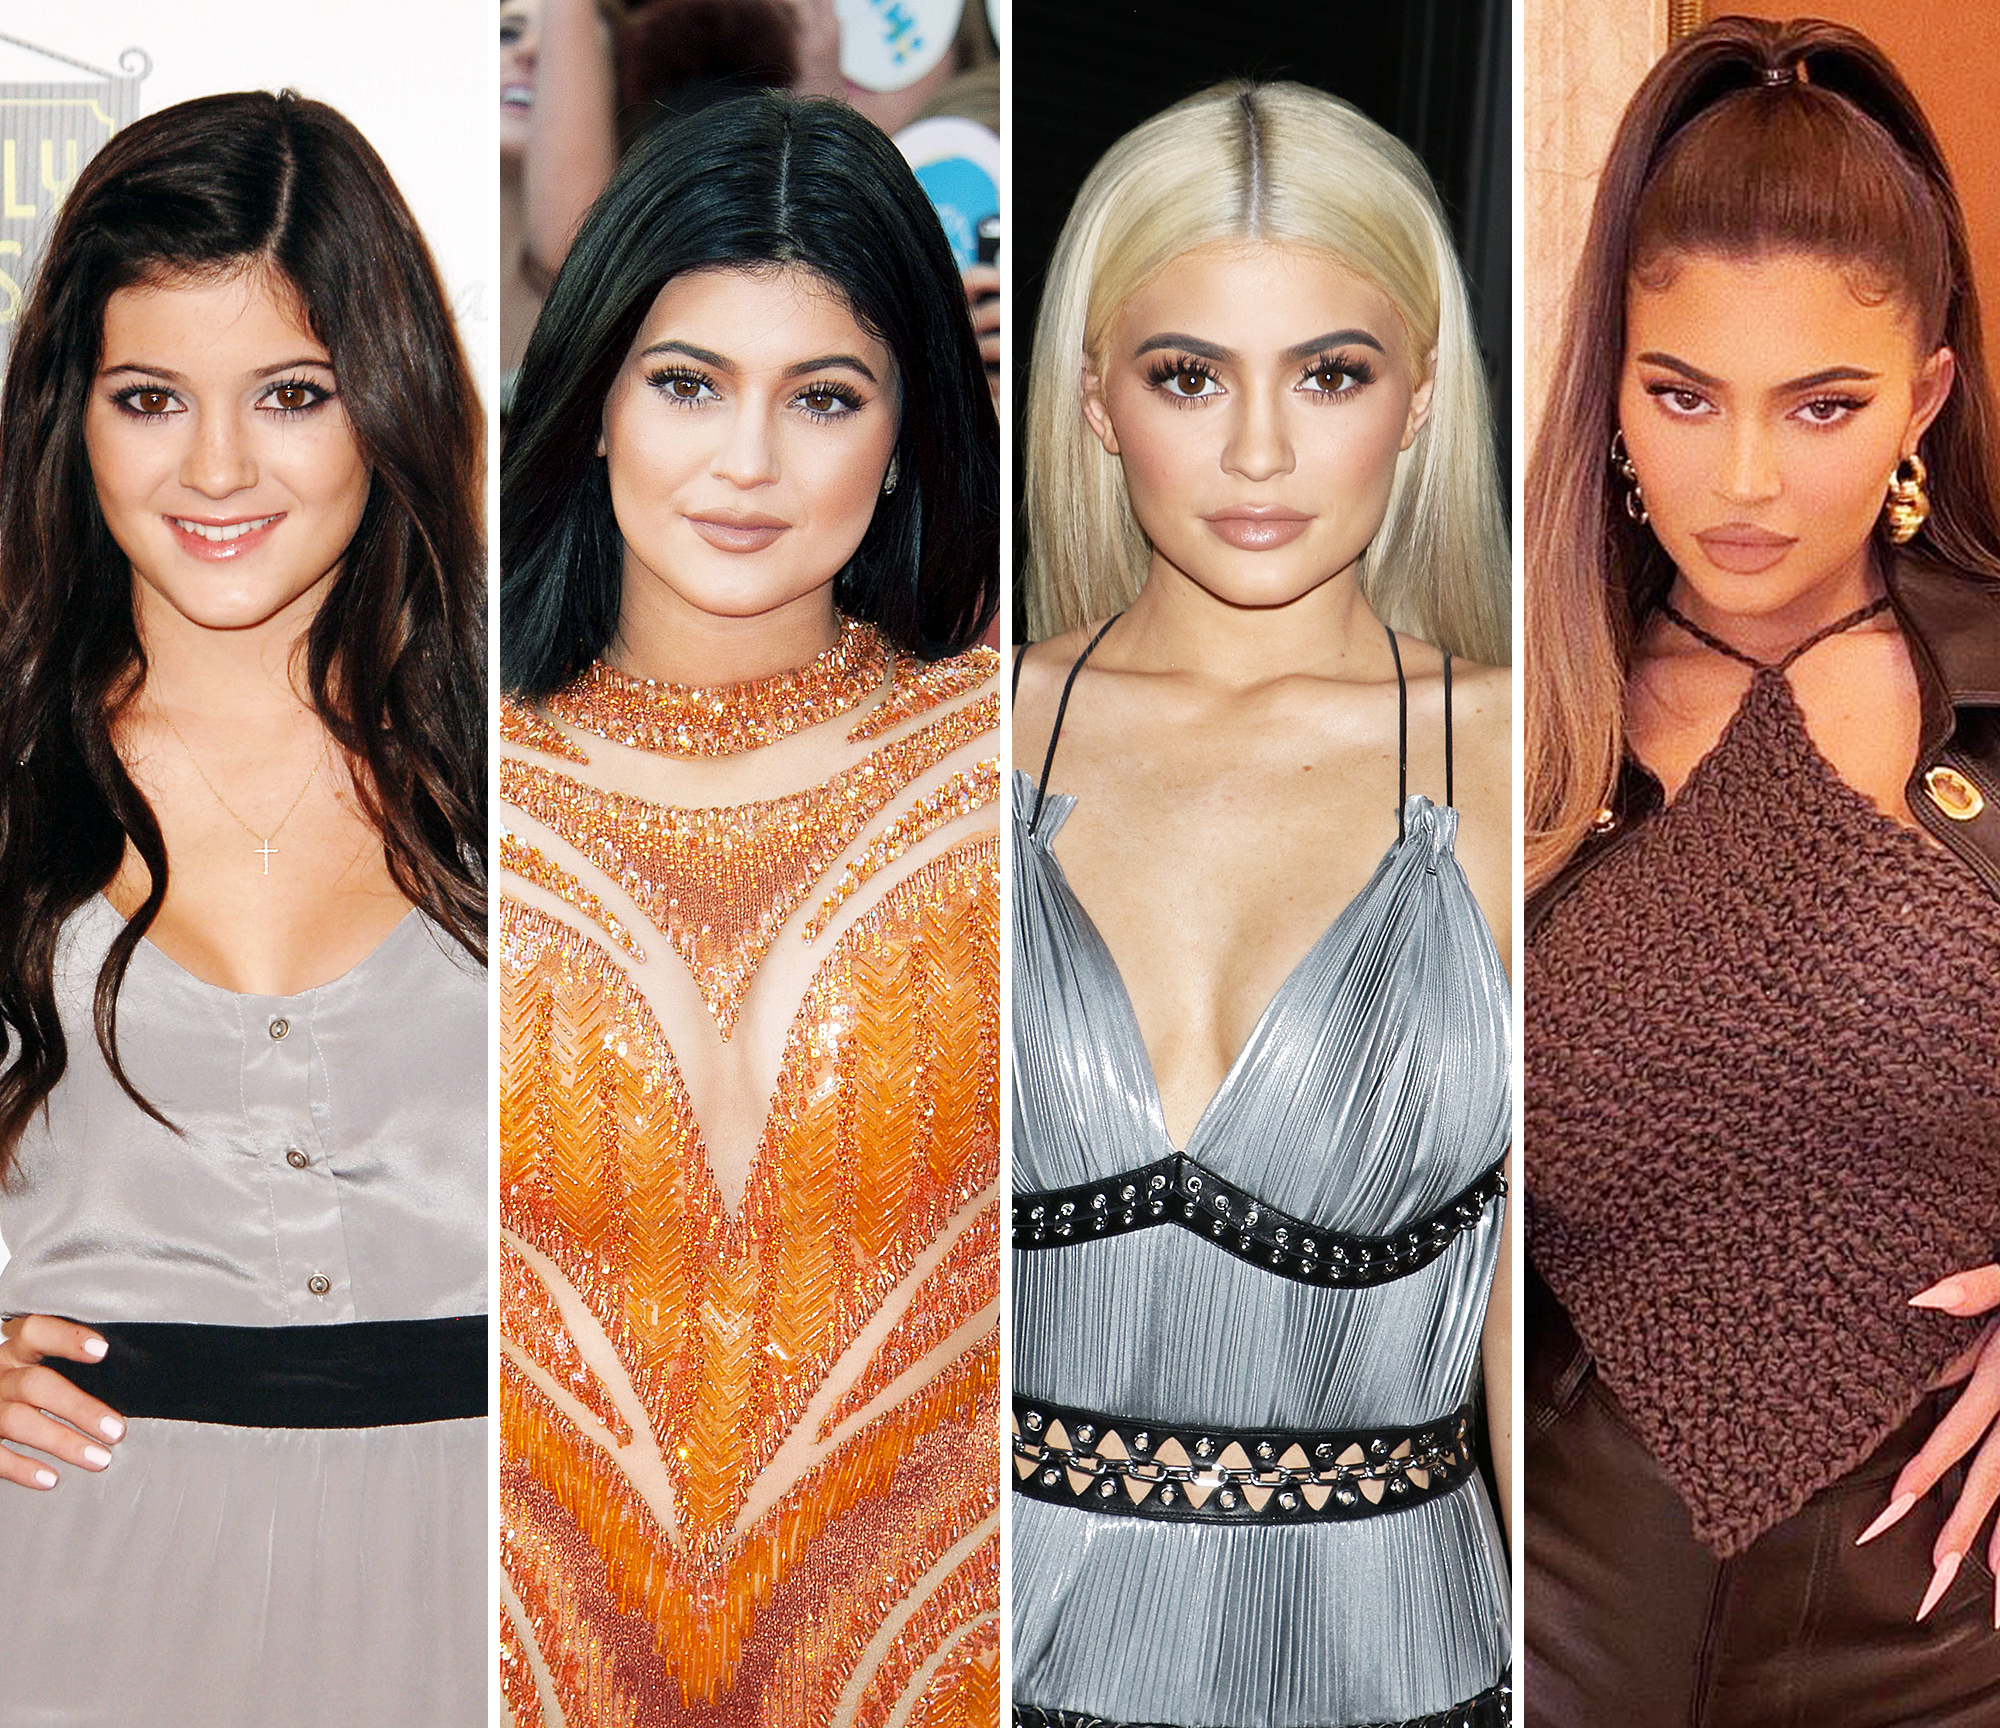 Kardashian Jenners Plastic Surgery Before And After Photos 5802